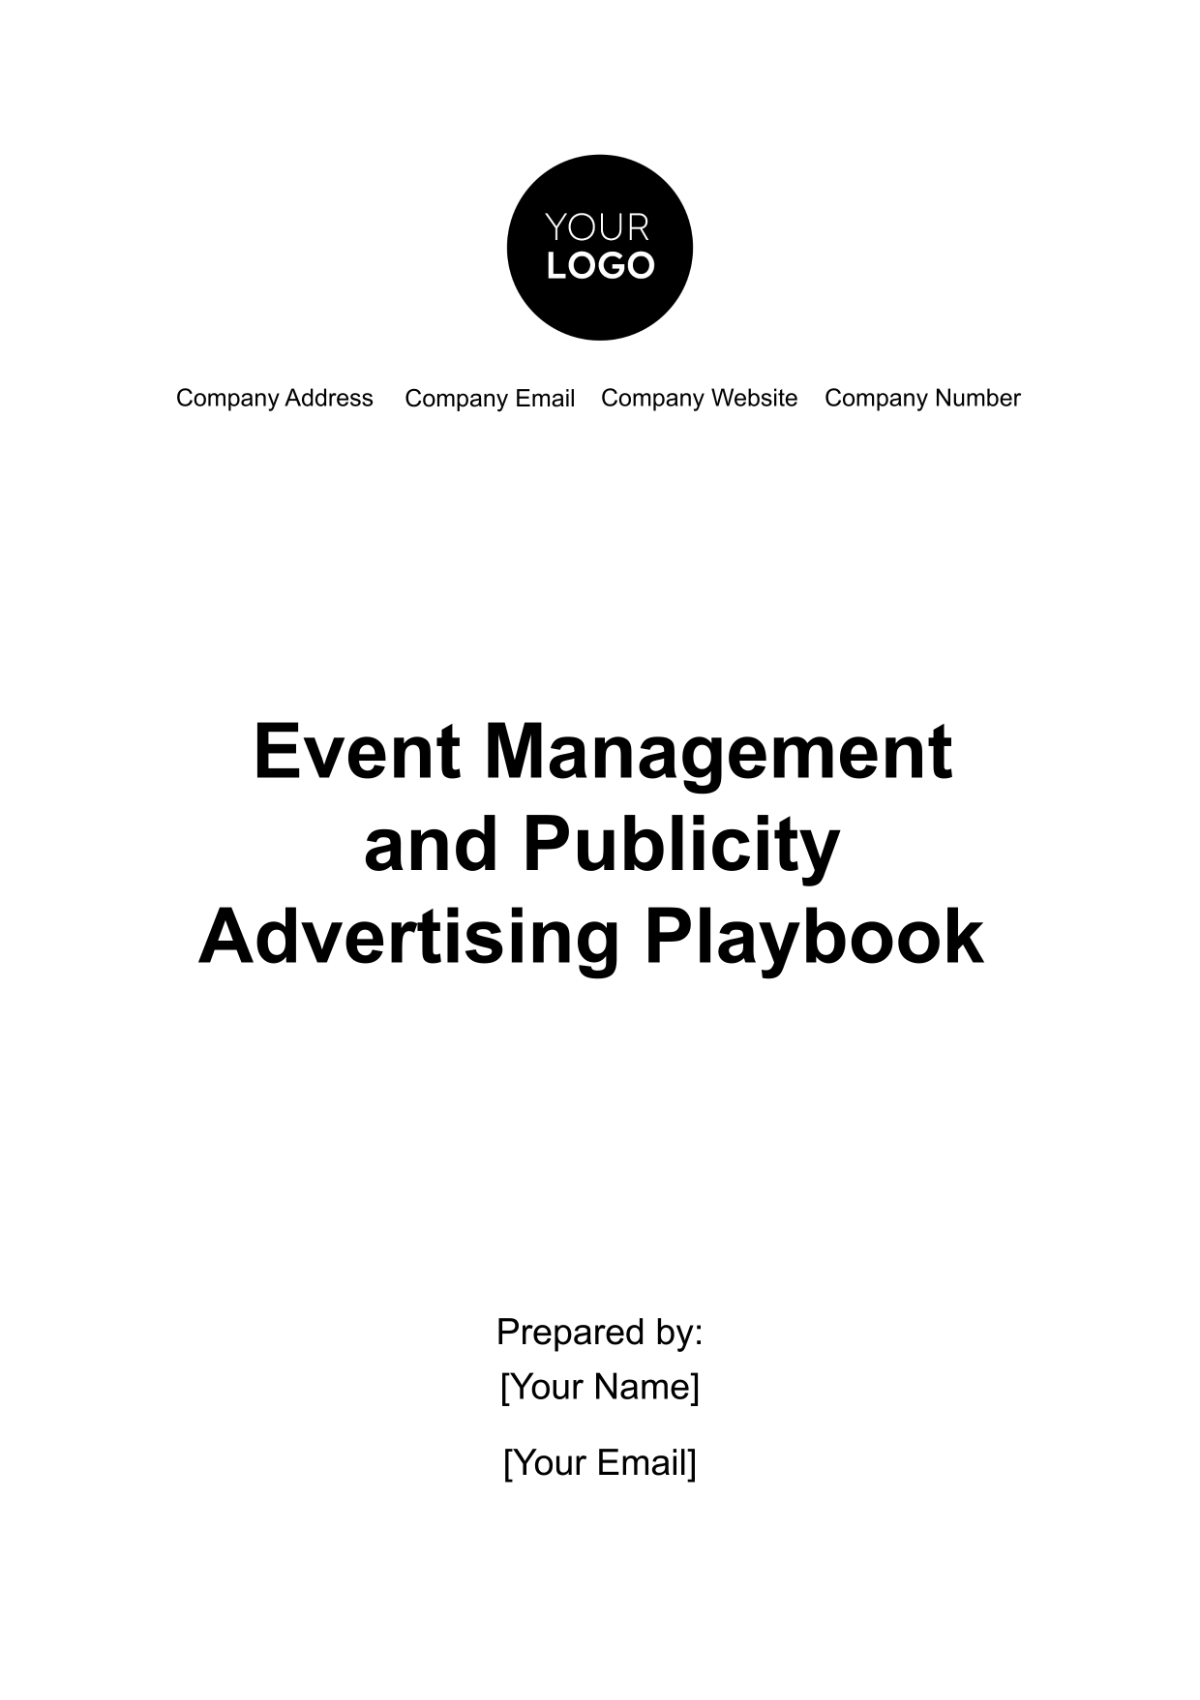 Free Event Management and Publicity Advertising Playbook Template